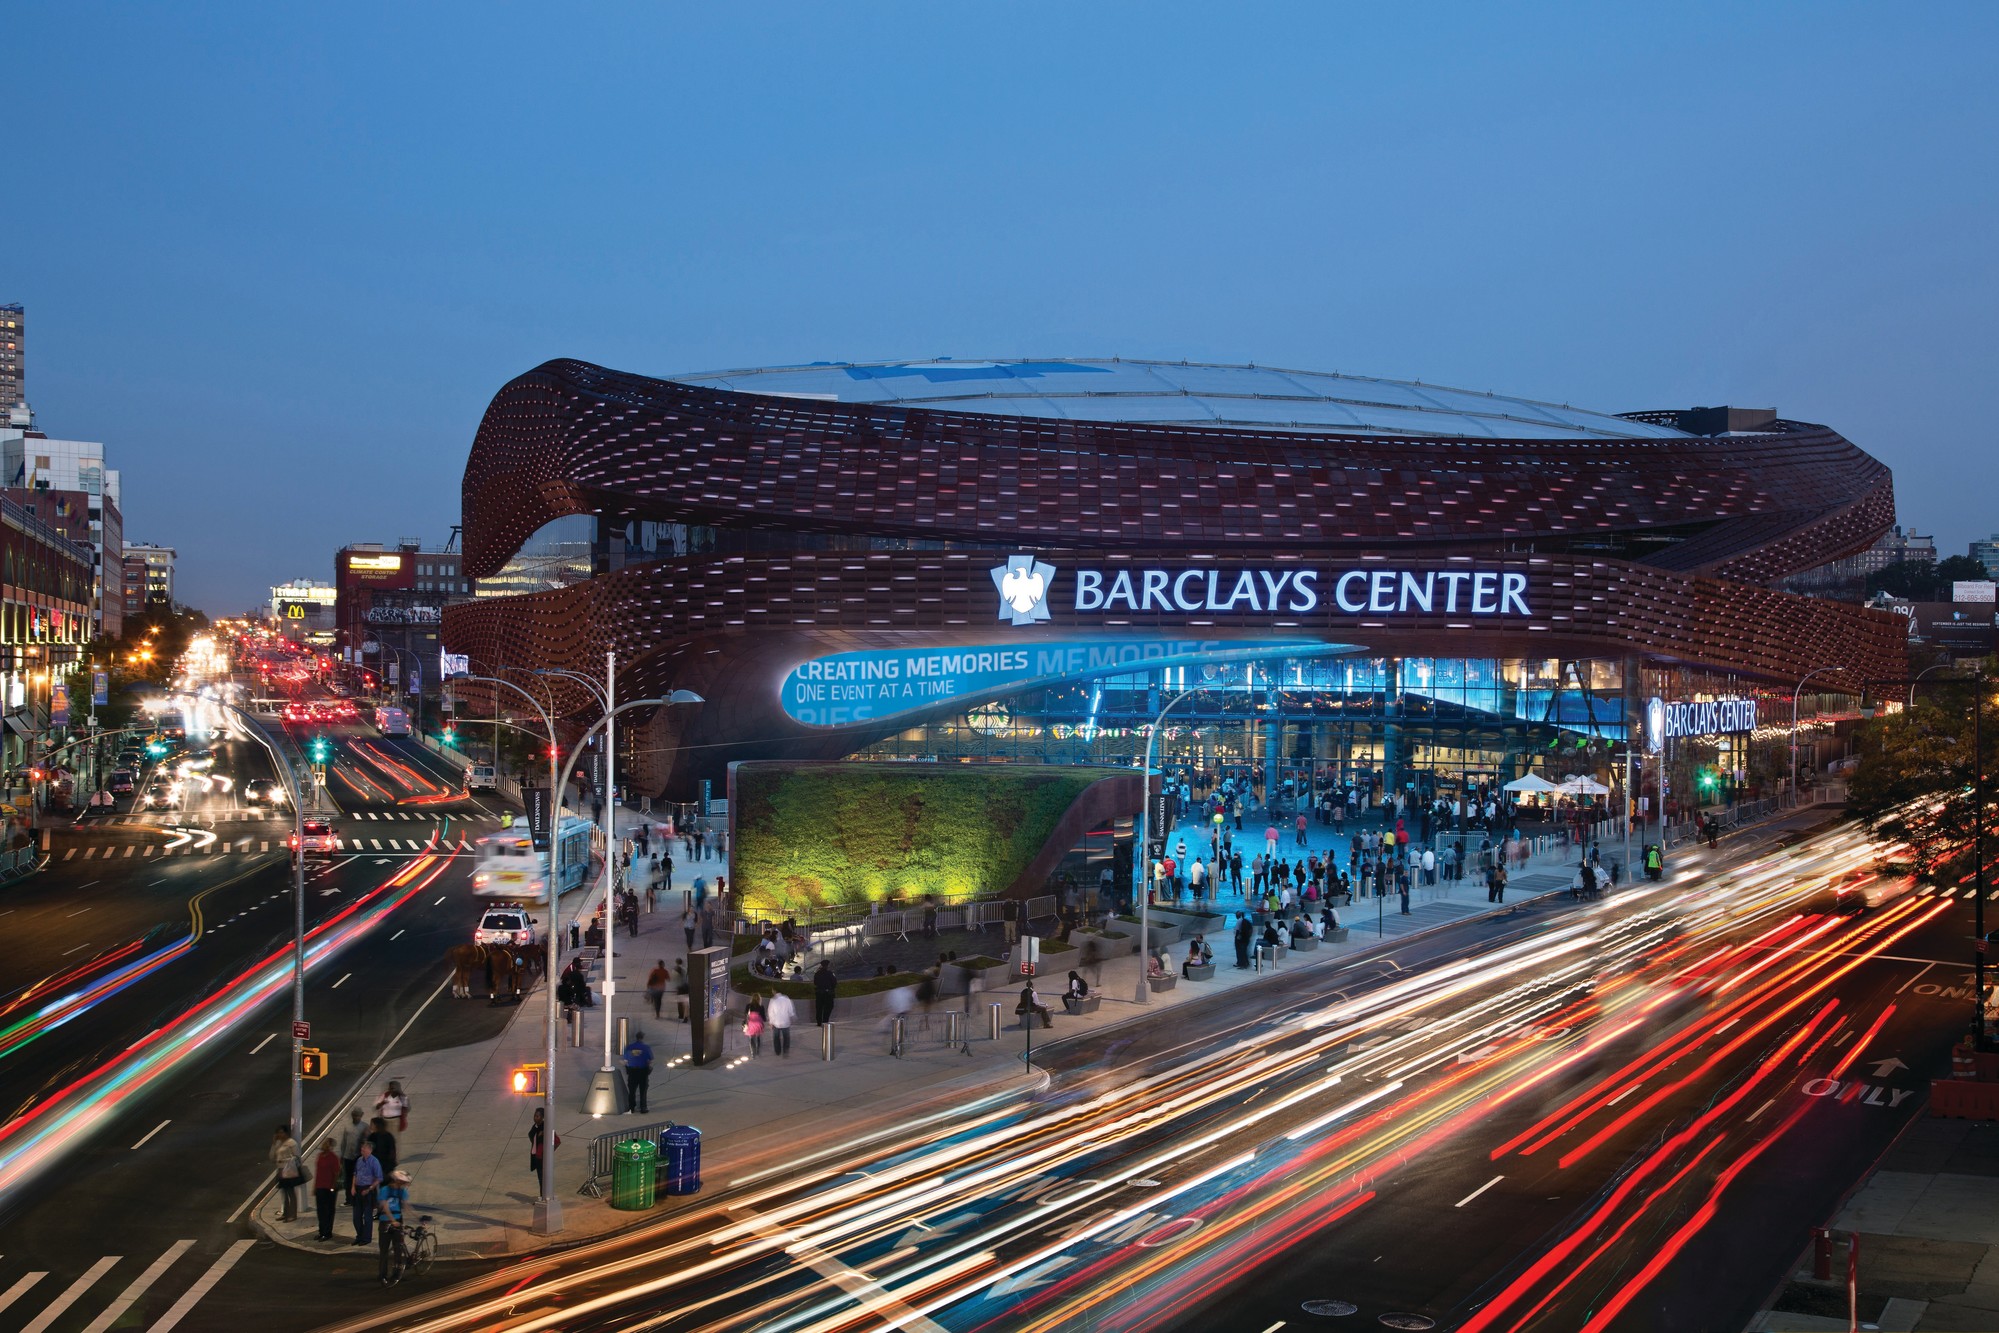 The $1.3 billion Barclays Center is the home of the NBA's Brooklyn Nets. The Islanders will move into the arena in the 2015-2016 season, but they will face off against the New Jersey Devils there on Sept. 26